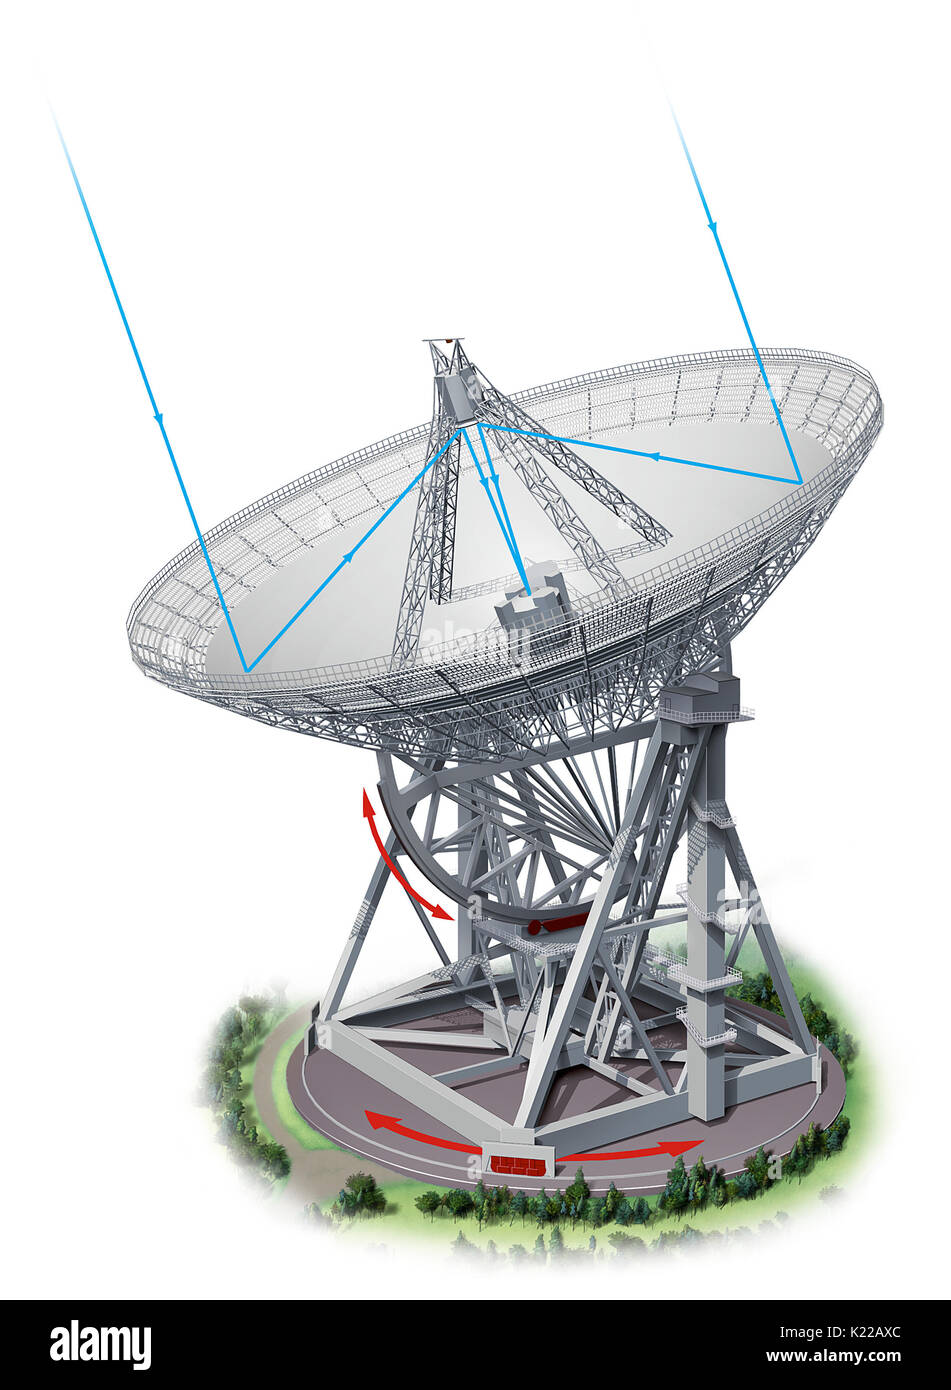 Type of adjustable radio telescope in the shape of a saucer; its power depends on its diameter. Stock Photo